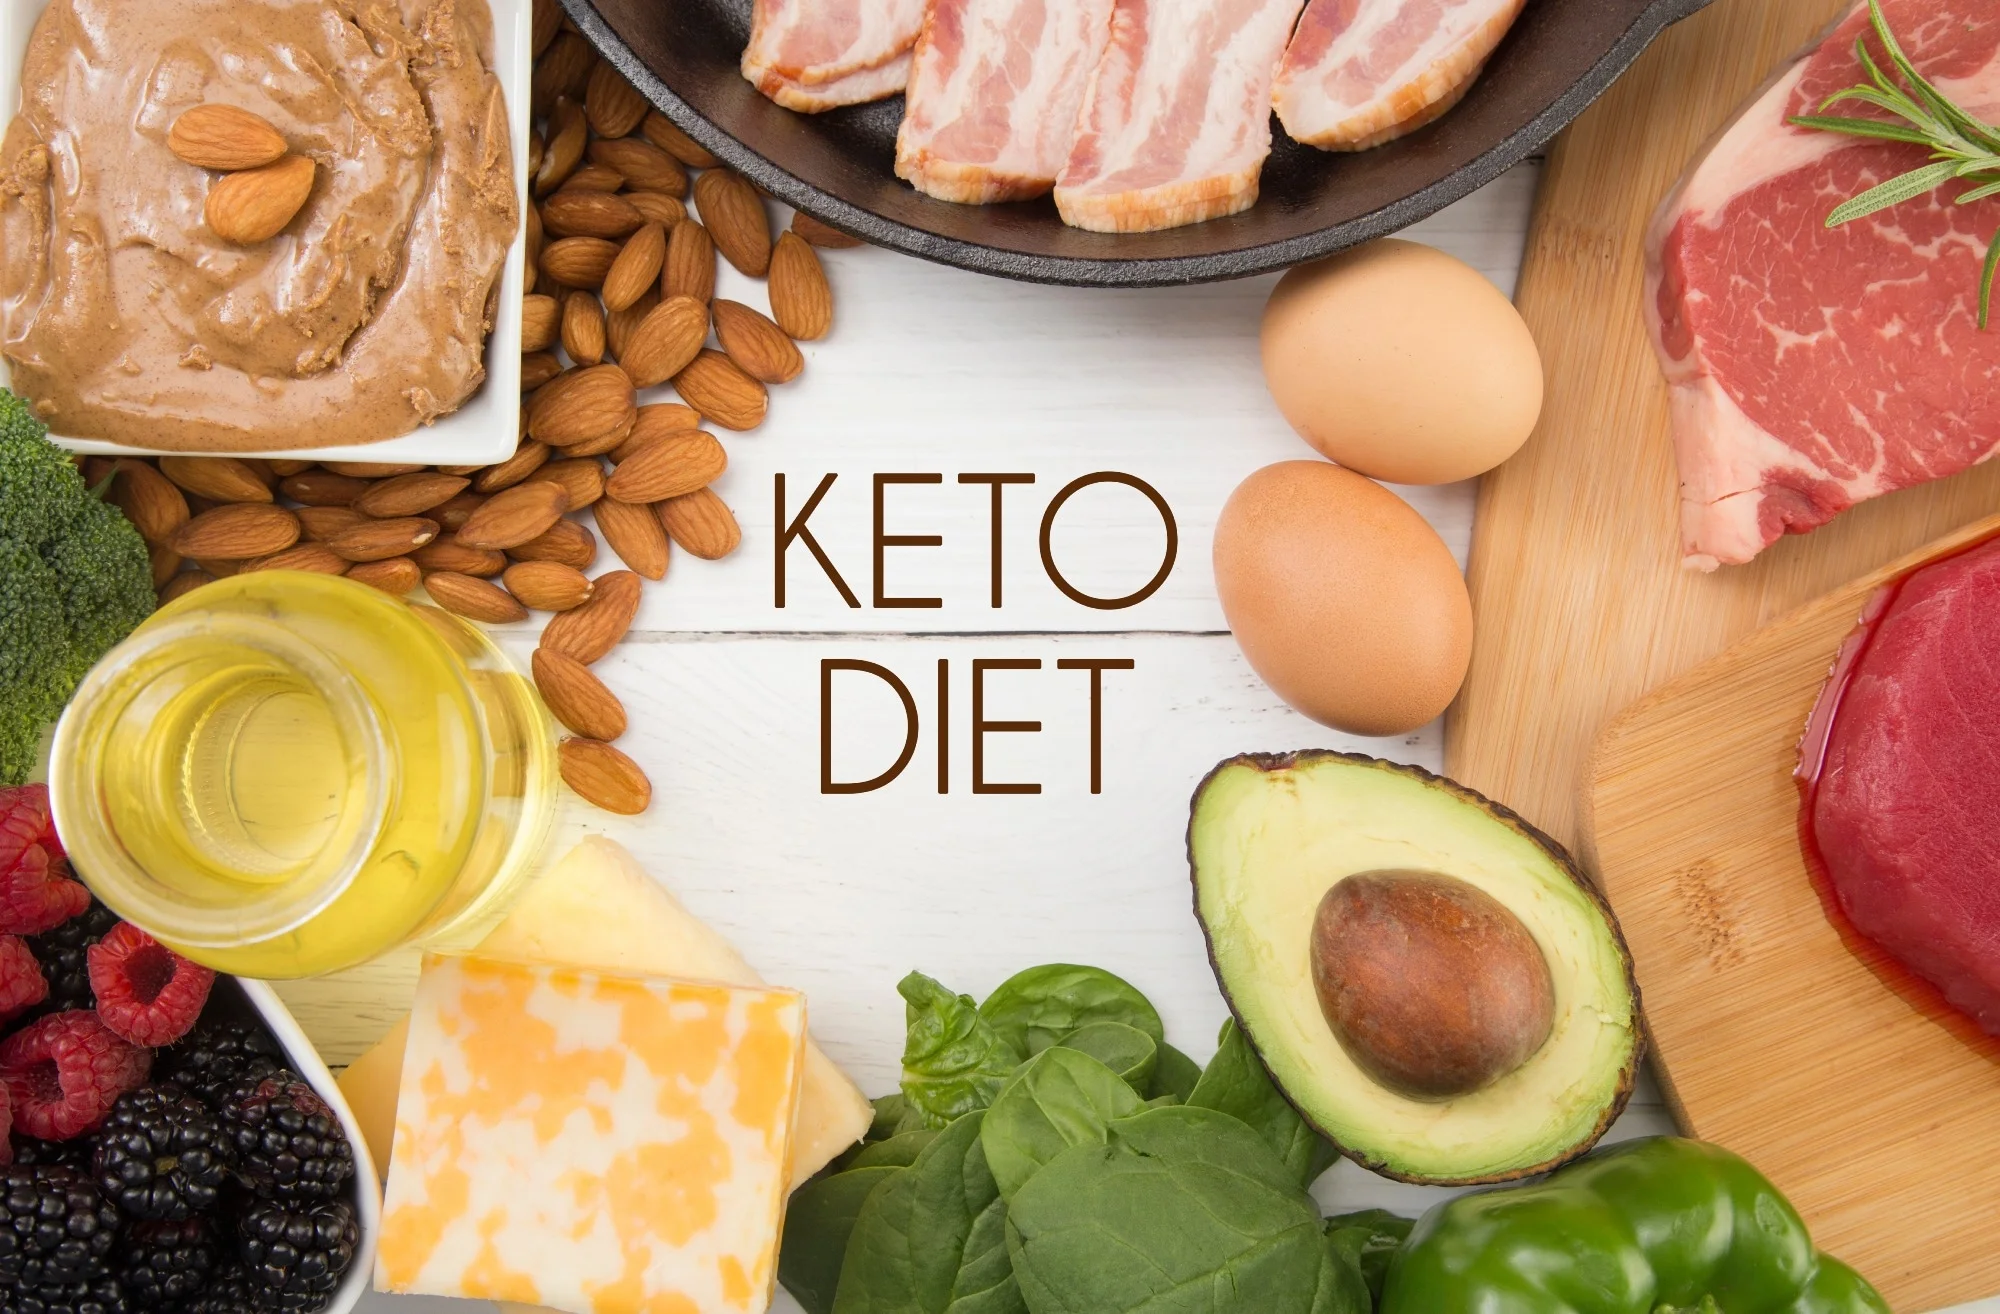 Konscious Keto Review: Are Keto Digestive Supplements Healthier?